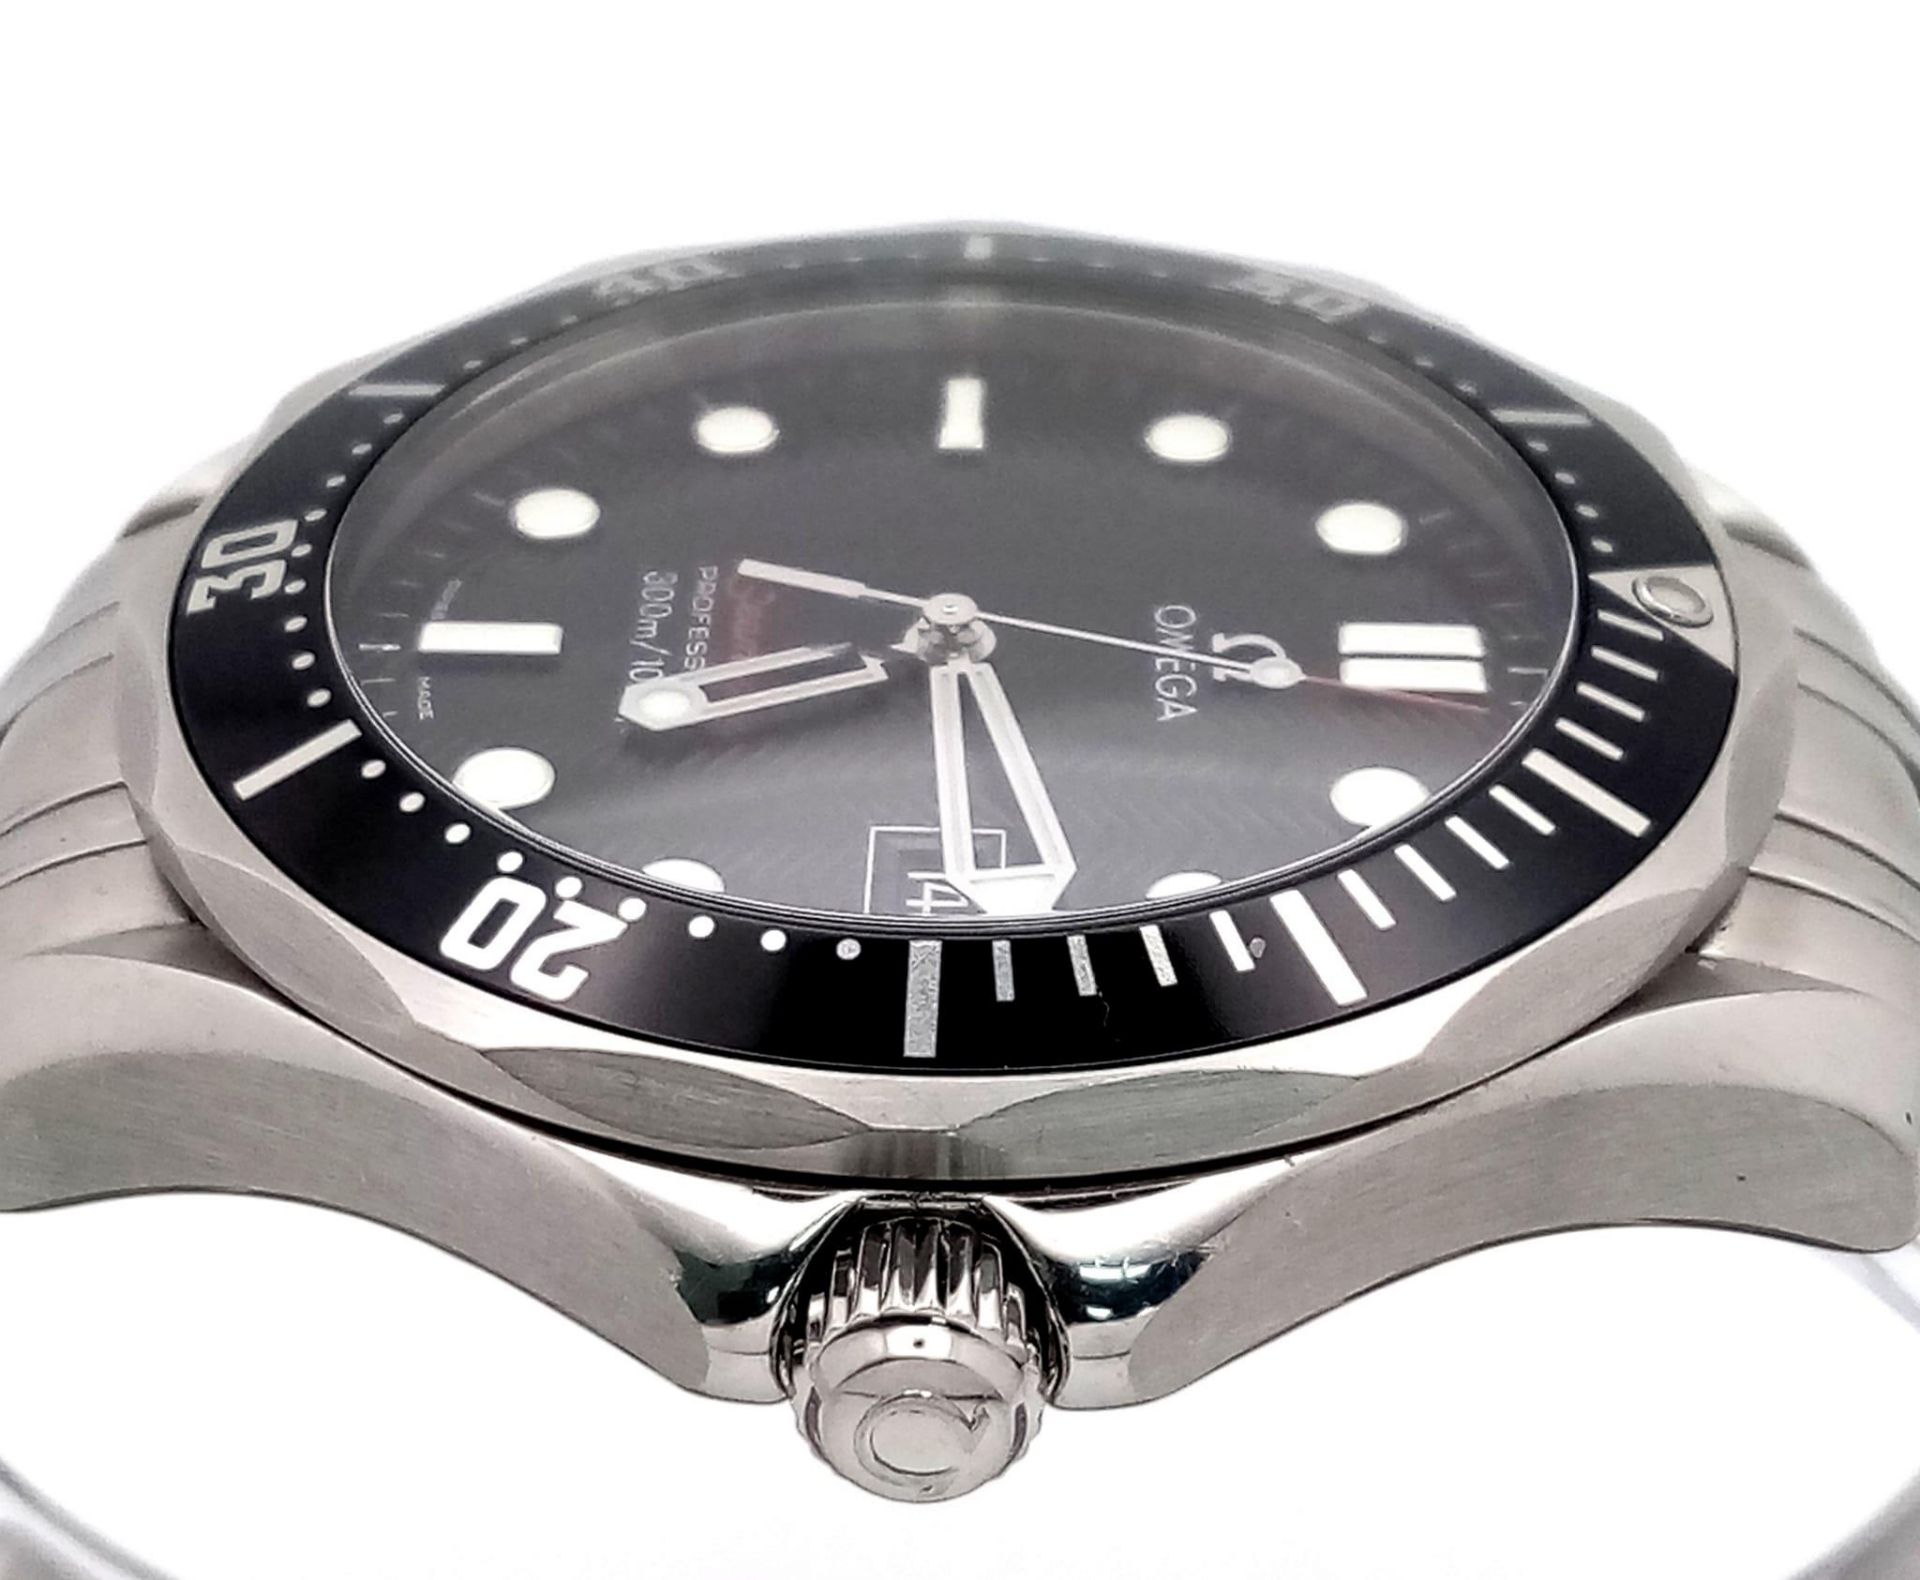 An Omega Seamaster Professional Gents Watch. Stainless steel bracelet and case - 41mm. Black dial - Image 4 of 7